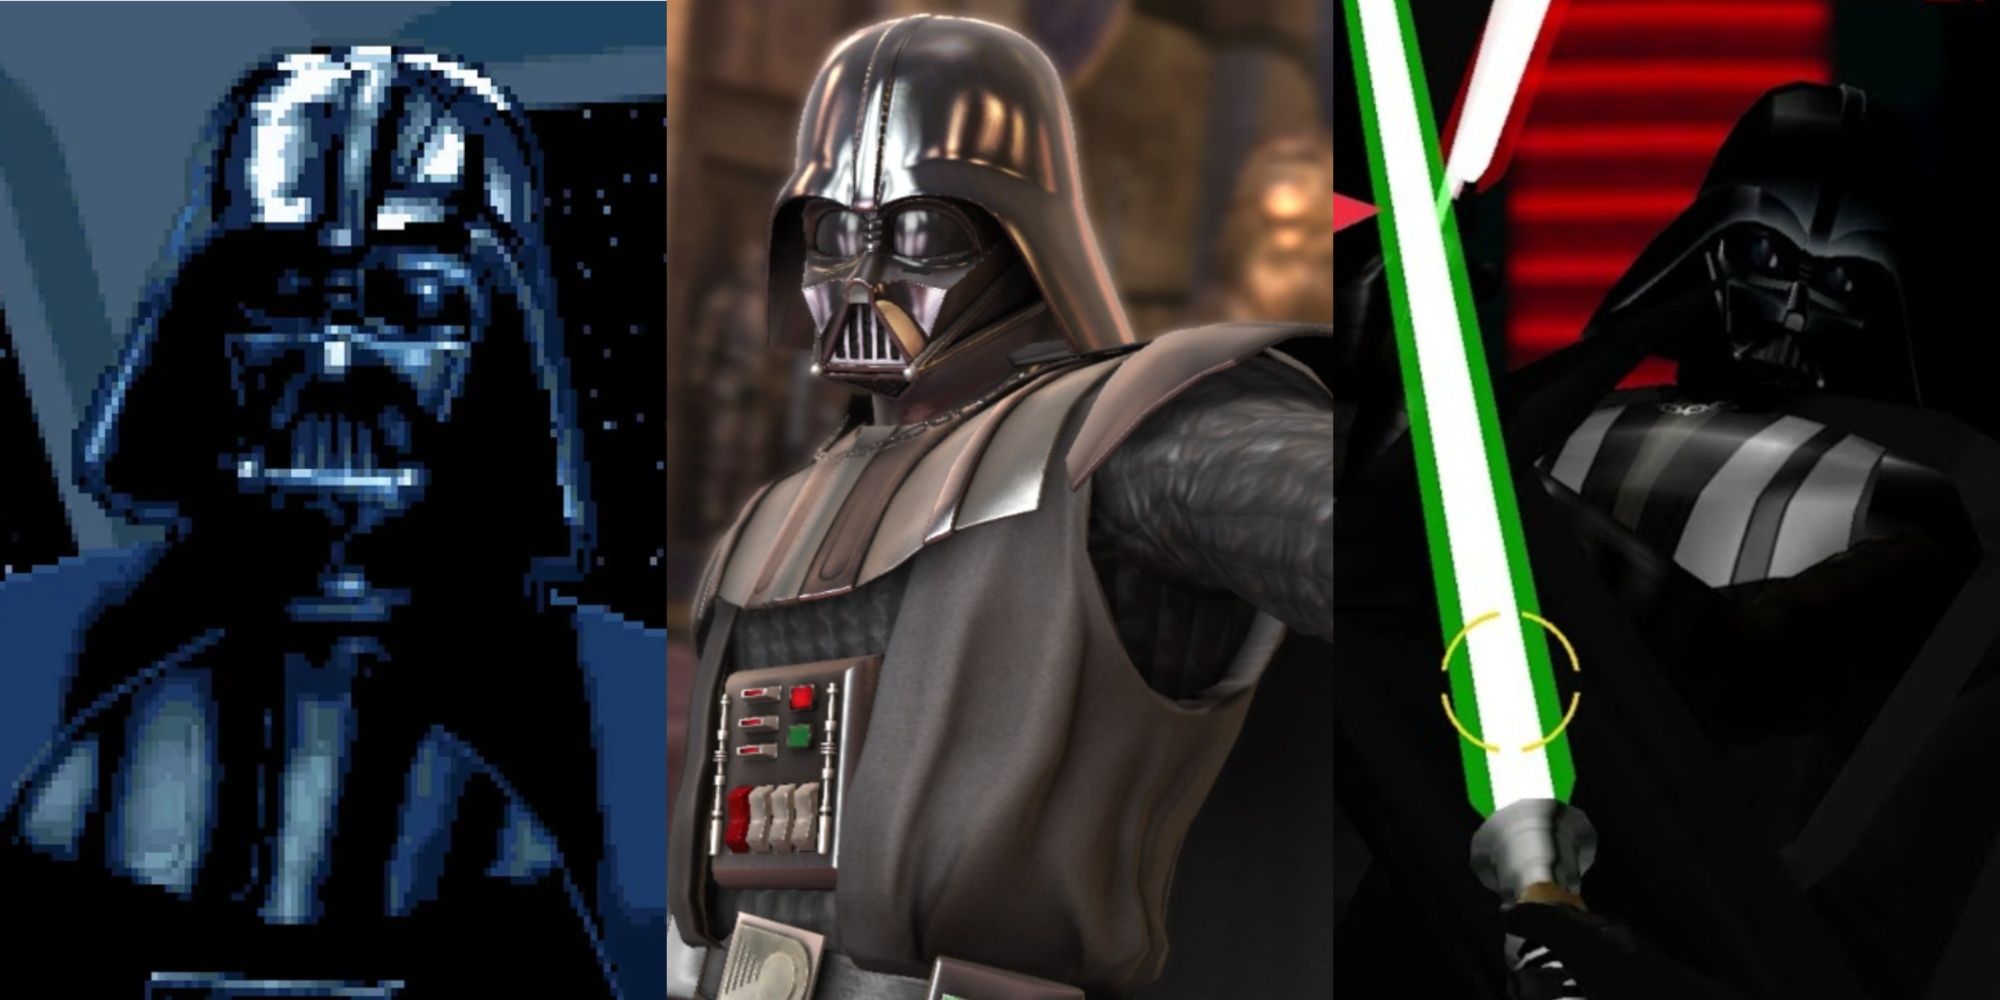 Collage image of Darth Vader in Star Wars Dark Forces, Soulcalibur 4, and Star Wars Arcade.